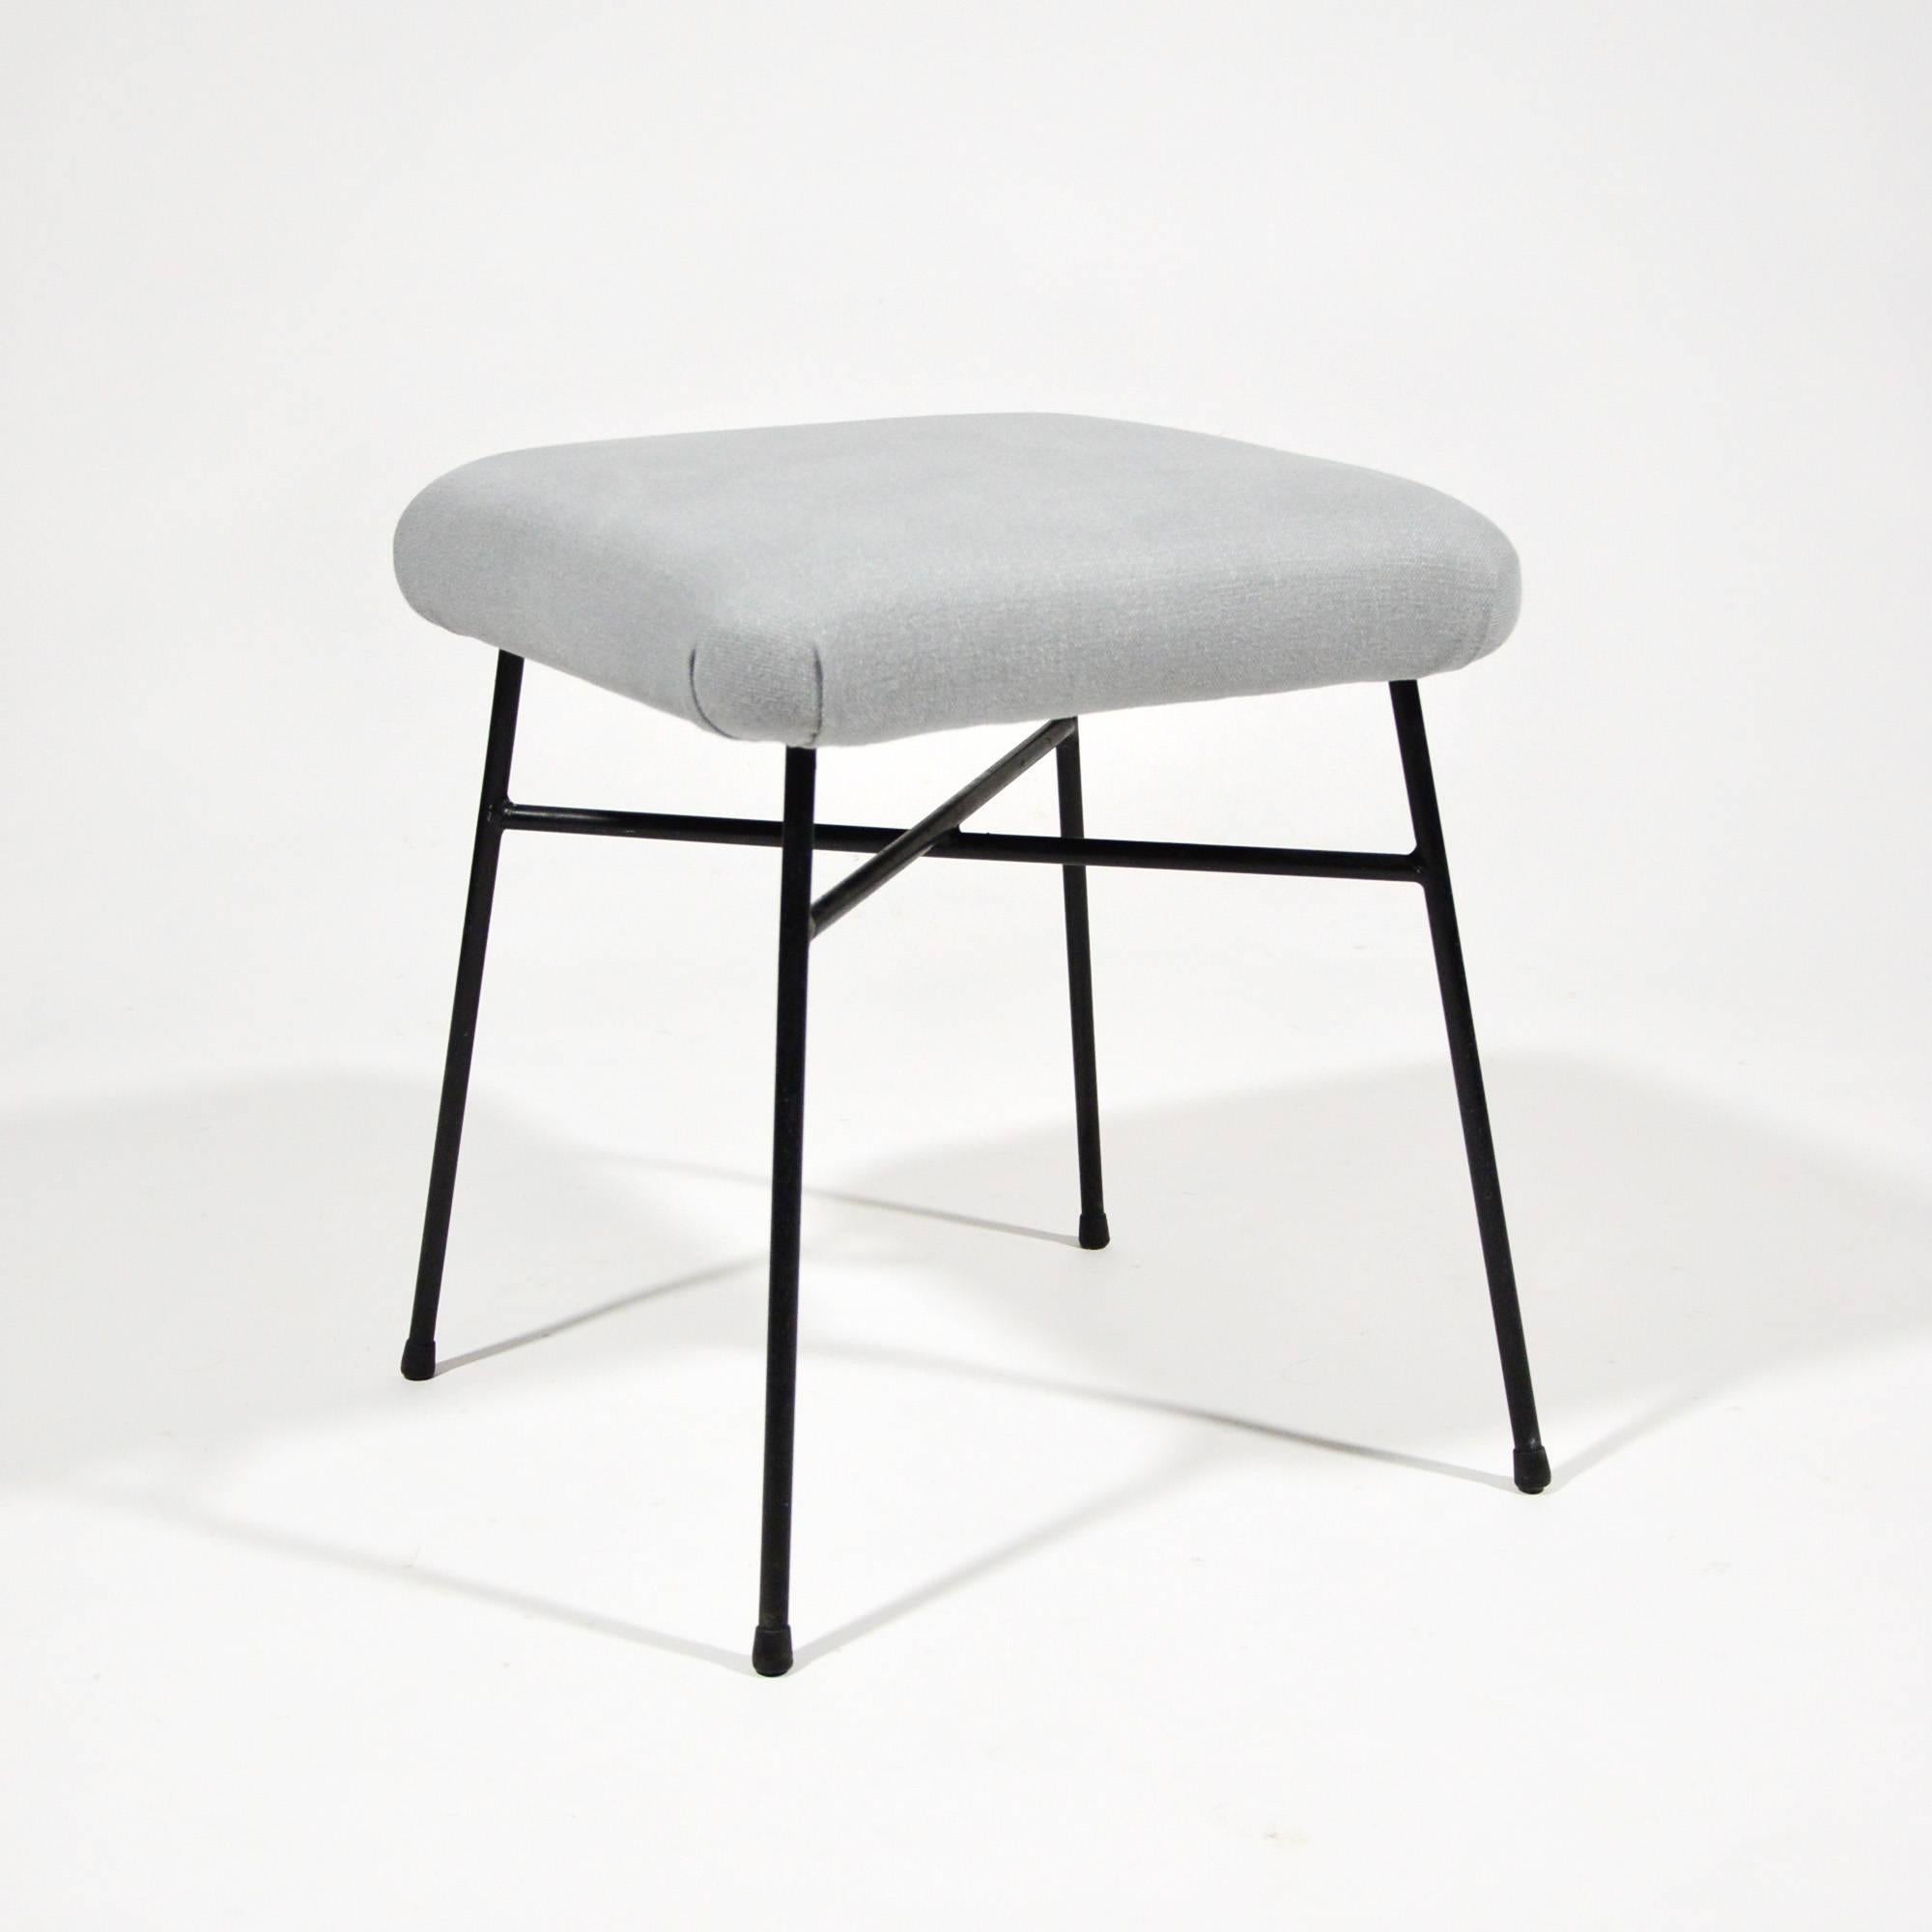 Ultra-rare Elettra stool designed by B.B.P.R. for Arflex in 1954, completely restored.
It has been newly upholstered in light grey cotton fabric and the metal structure has been painted in semi-matt black, like in origin.
